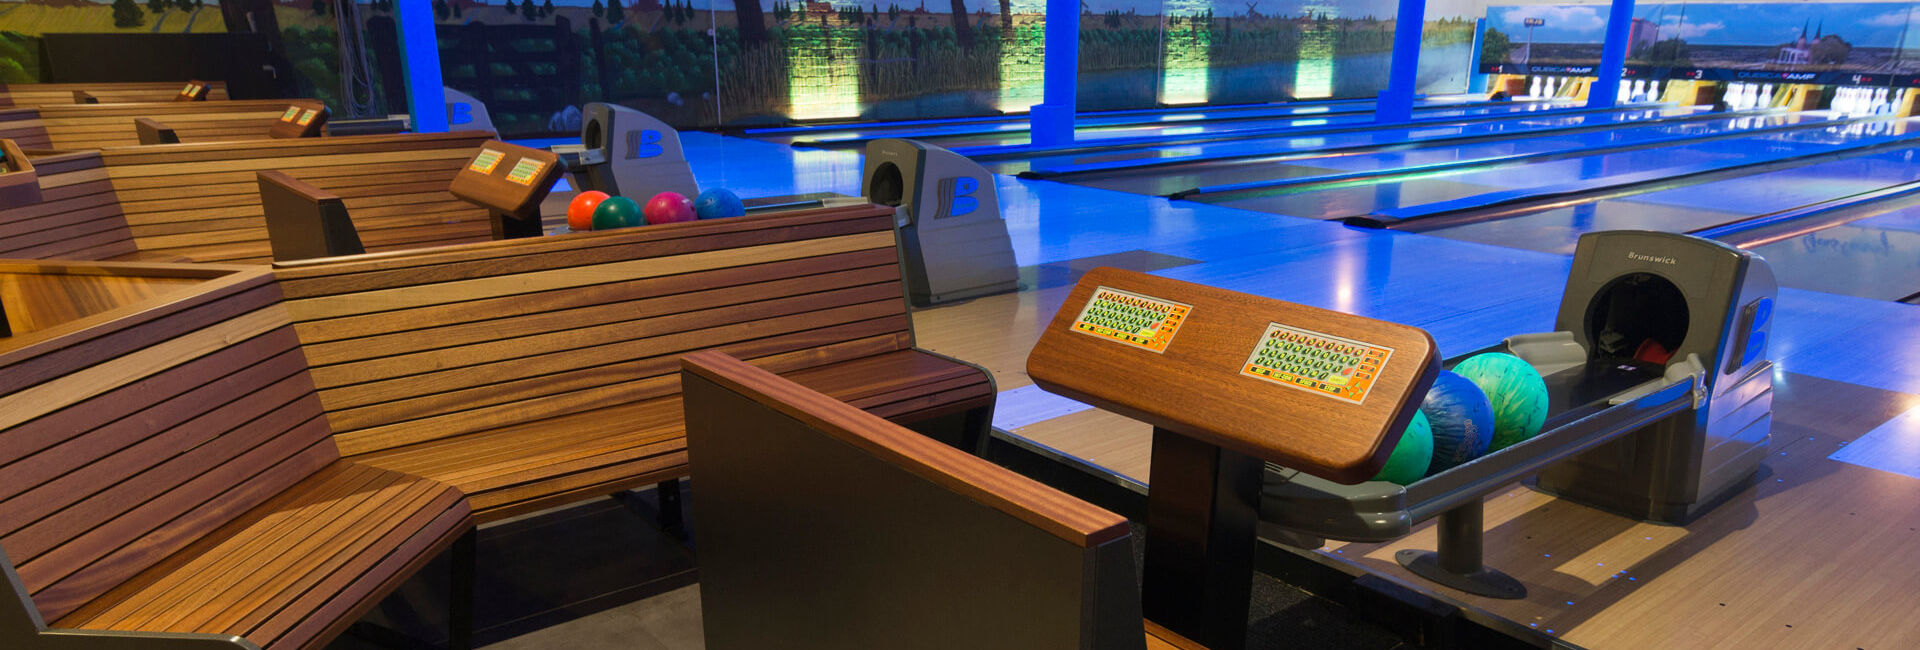 Bowling lanes and seats - Route directions - Gasterij 't Karrewiel